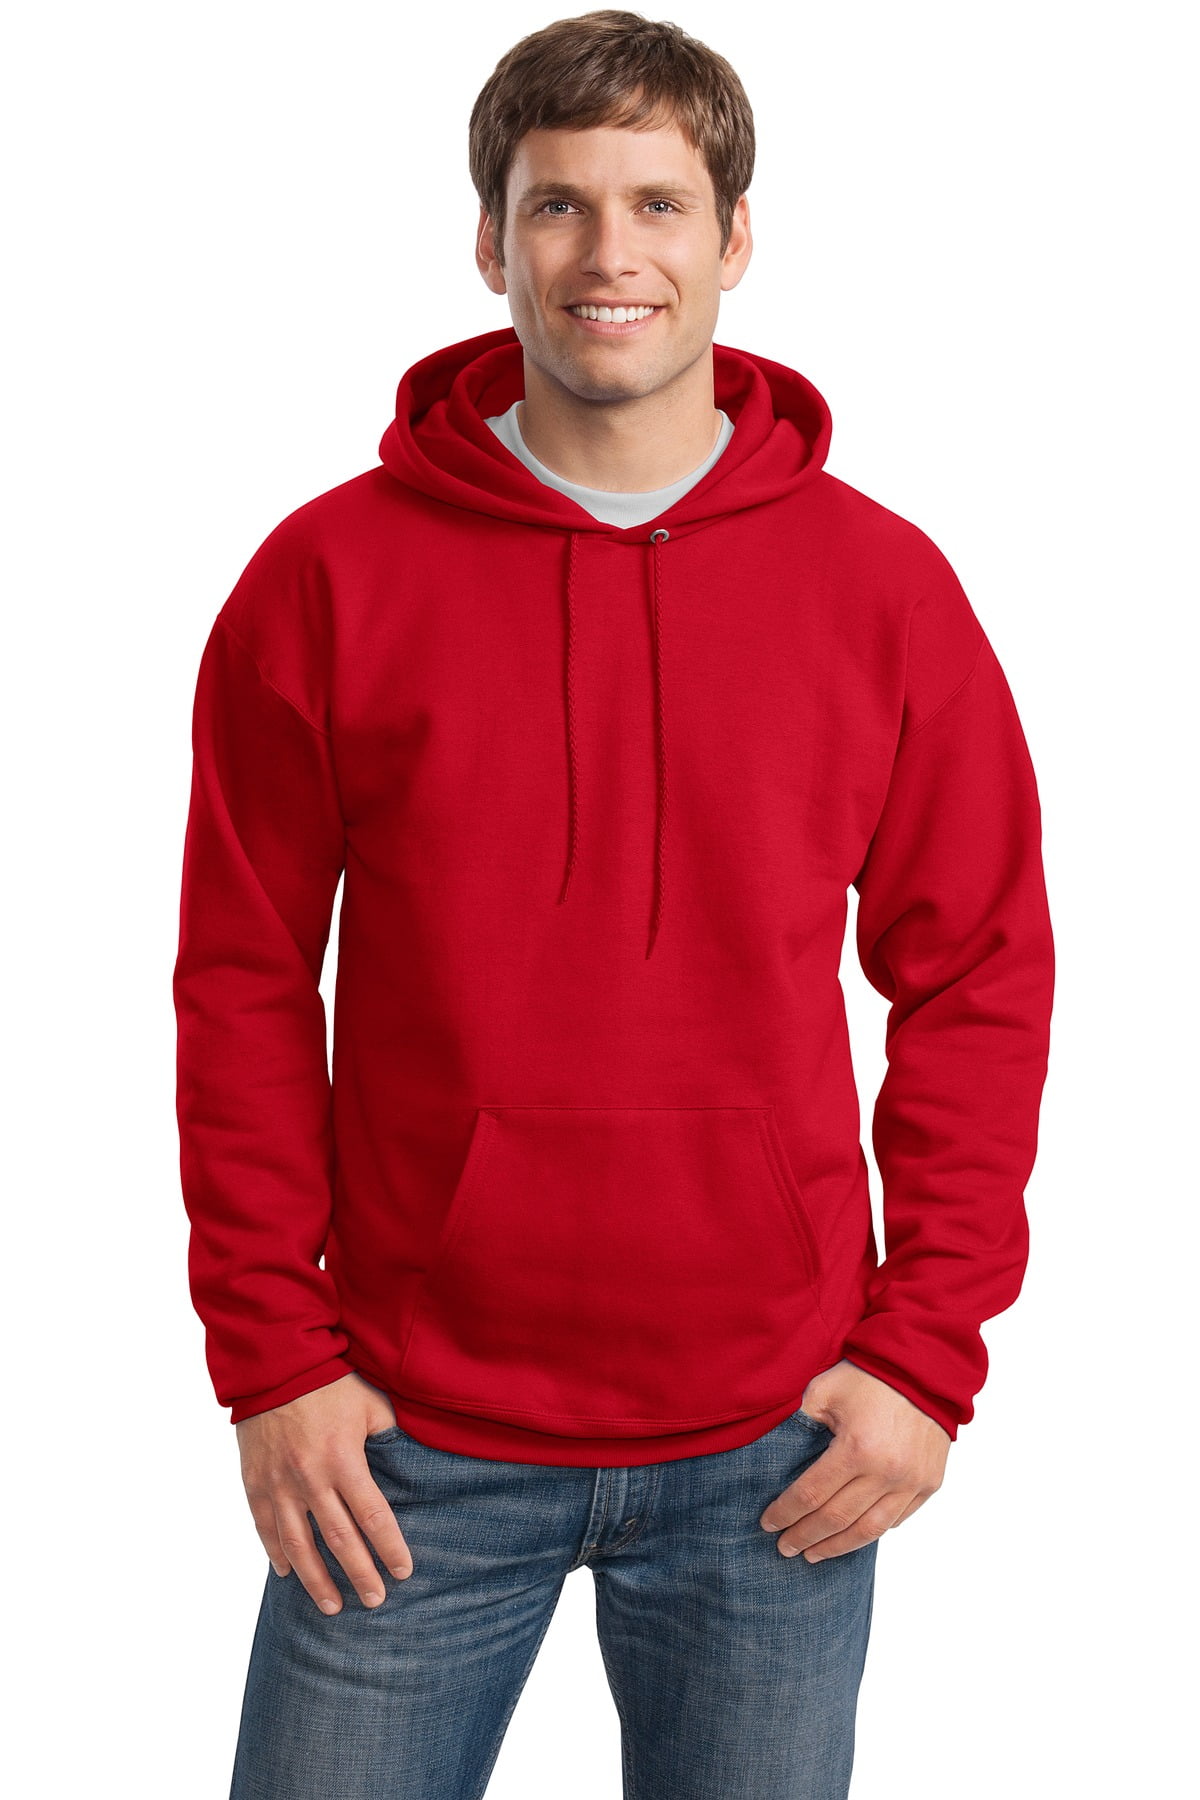 Hanes Men's Front Pouch Pocket Pullover Hooded Sweatshirt - F170 